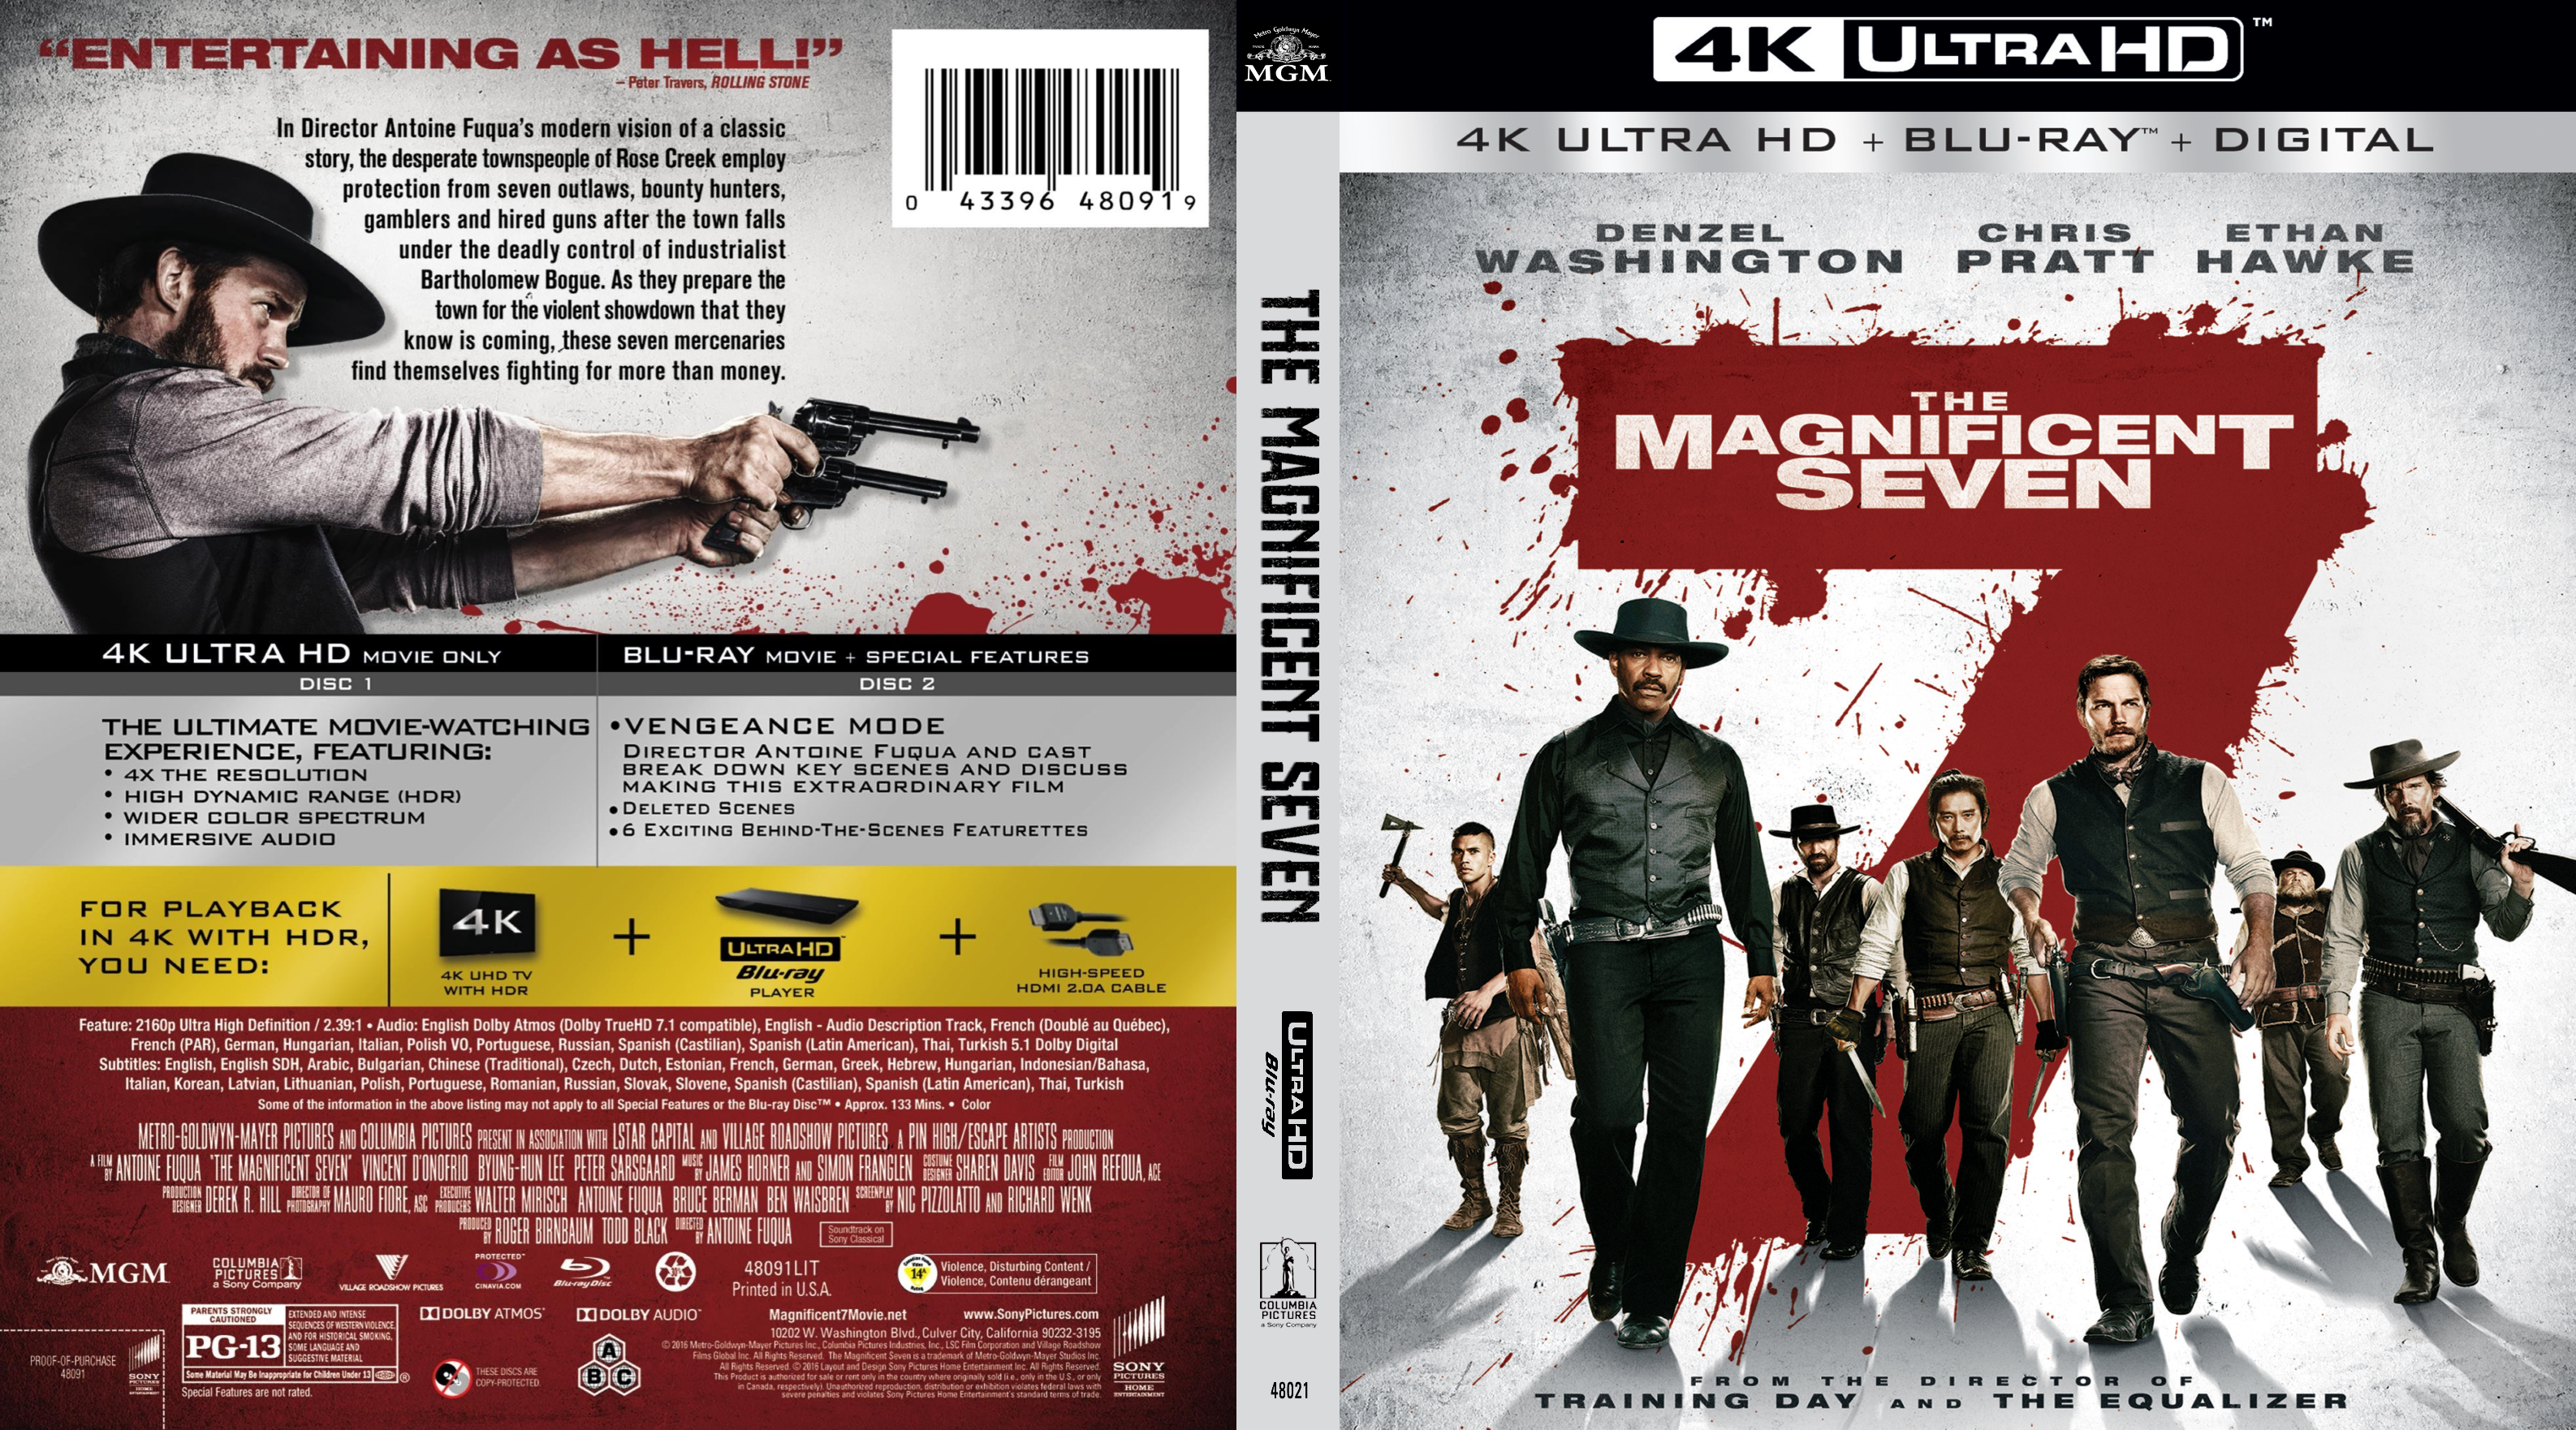 Magnificent Seven Dvd Cover Wallpapers